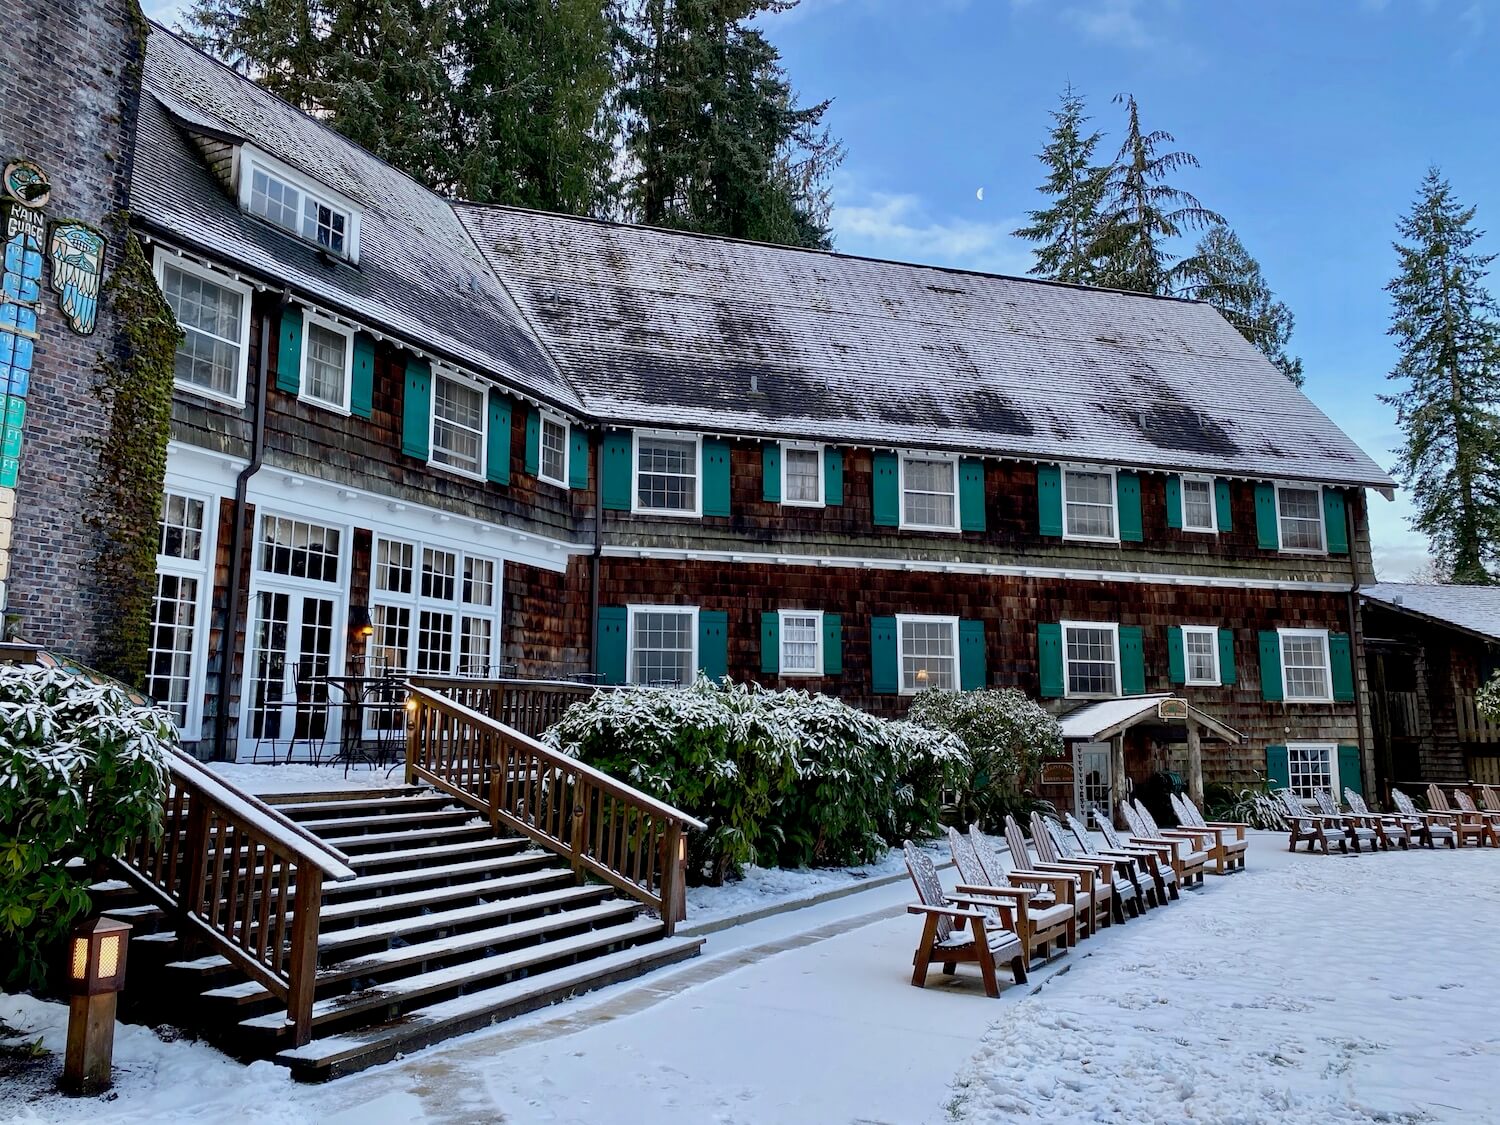 No visit to the Olympic Peninsula is complete with out an explore around majestic of Lake Quinault Lodge, which is two levels of paned windows with green shutters and a dorm window that pops out. Stairs lead from the deck of the lodge to a snowy lawn with aiderondeck chairs lightly dusted with snow.